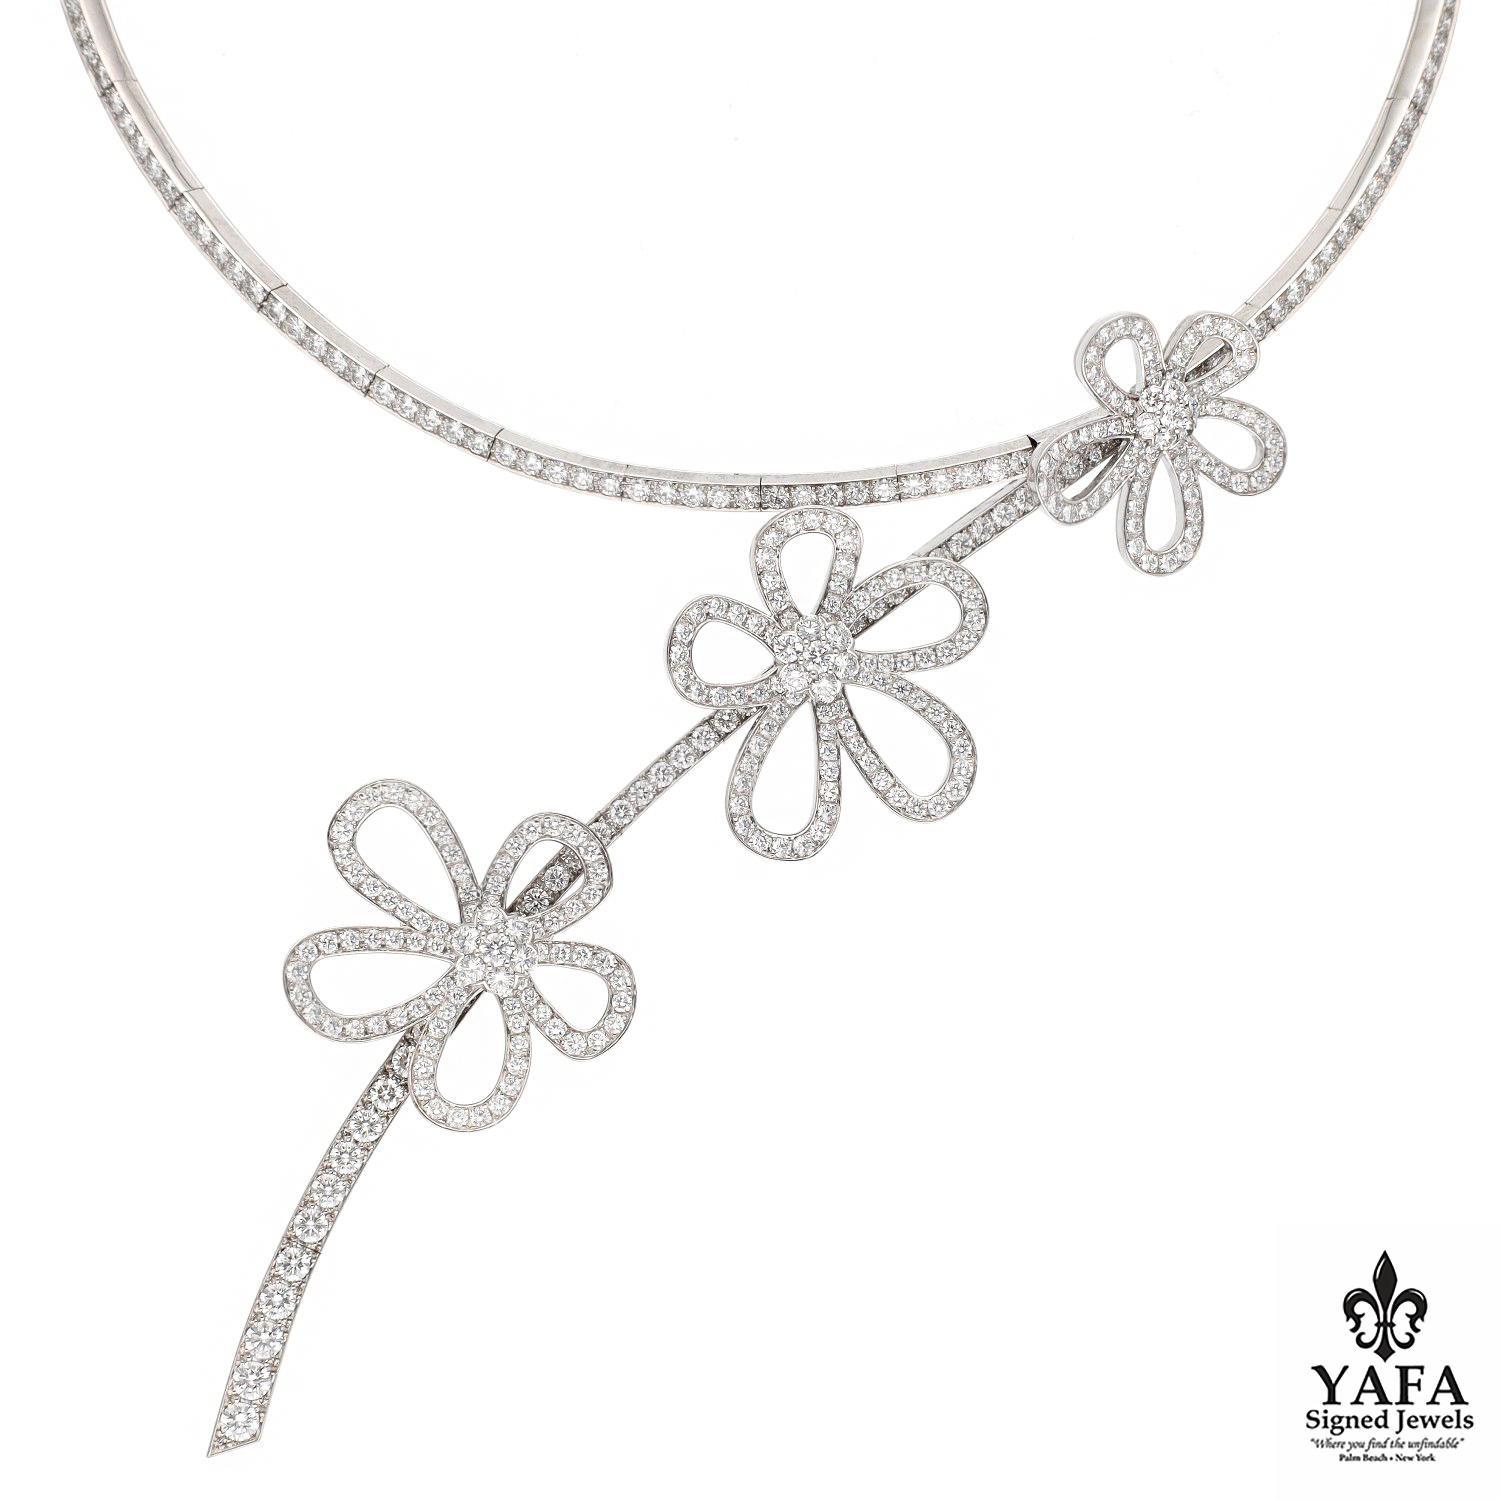 The Van Cleef and Arpels Flower Lace 18K White Gold and Diamonds Necklace is a stunning piece if jewelry know for its intricate design and craftsmanship. Featuring three delicate lace-like flowers as they cascade down the necklace adorned with